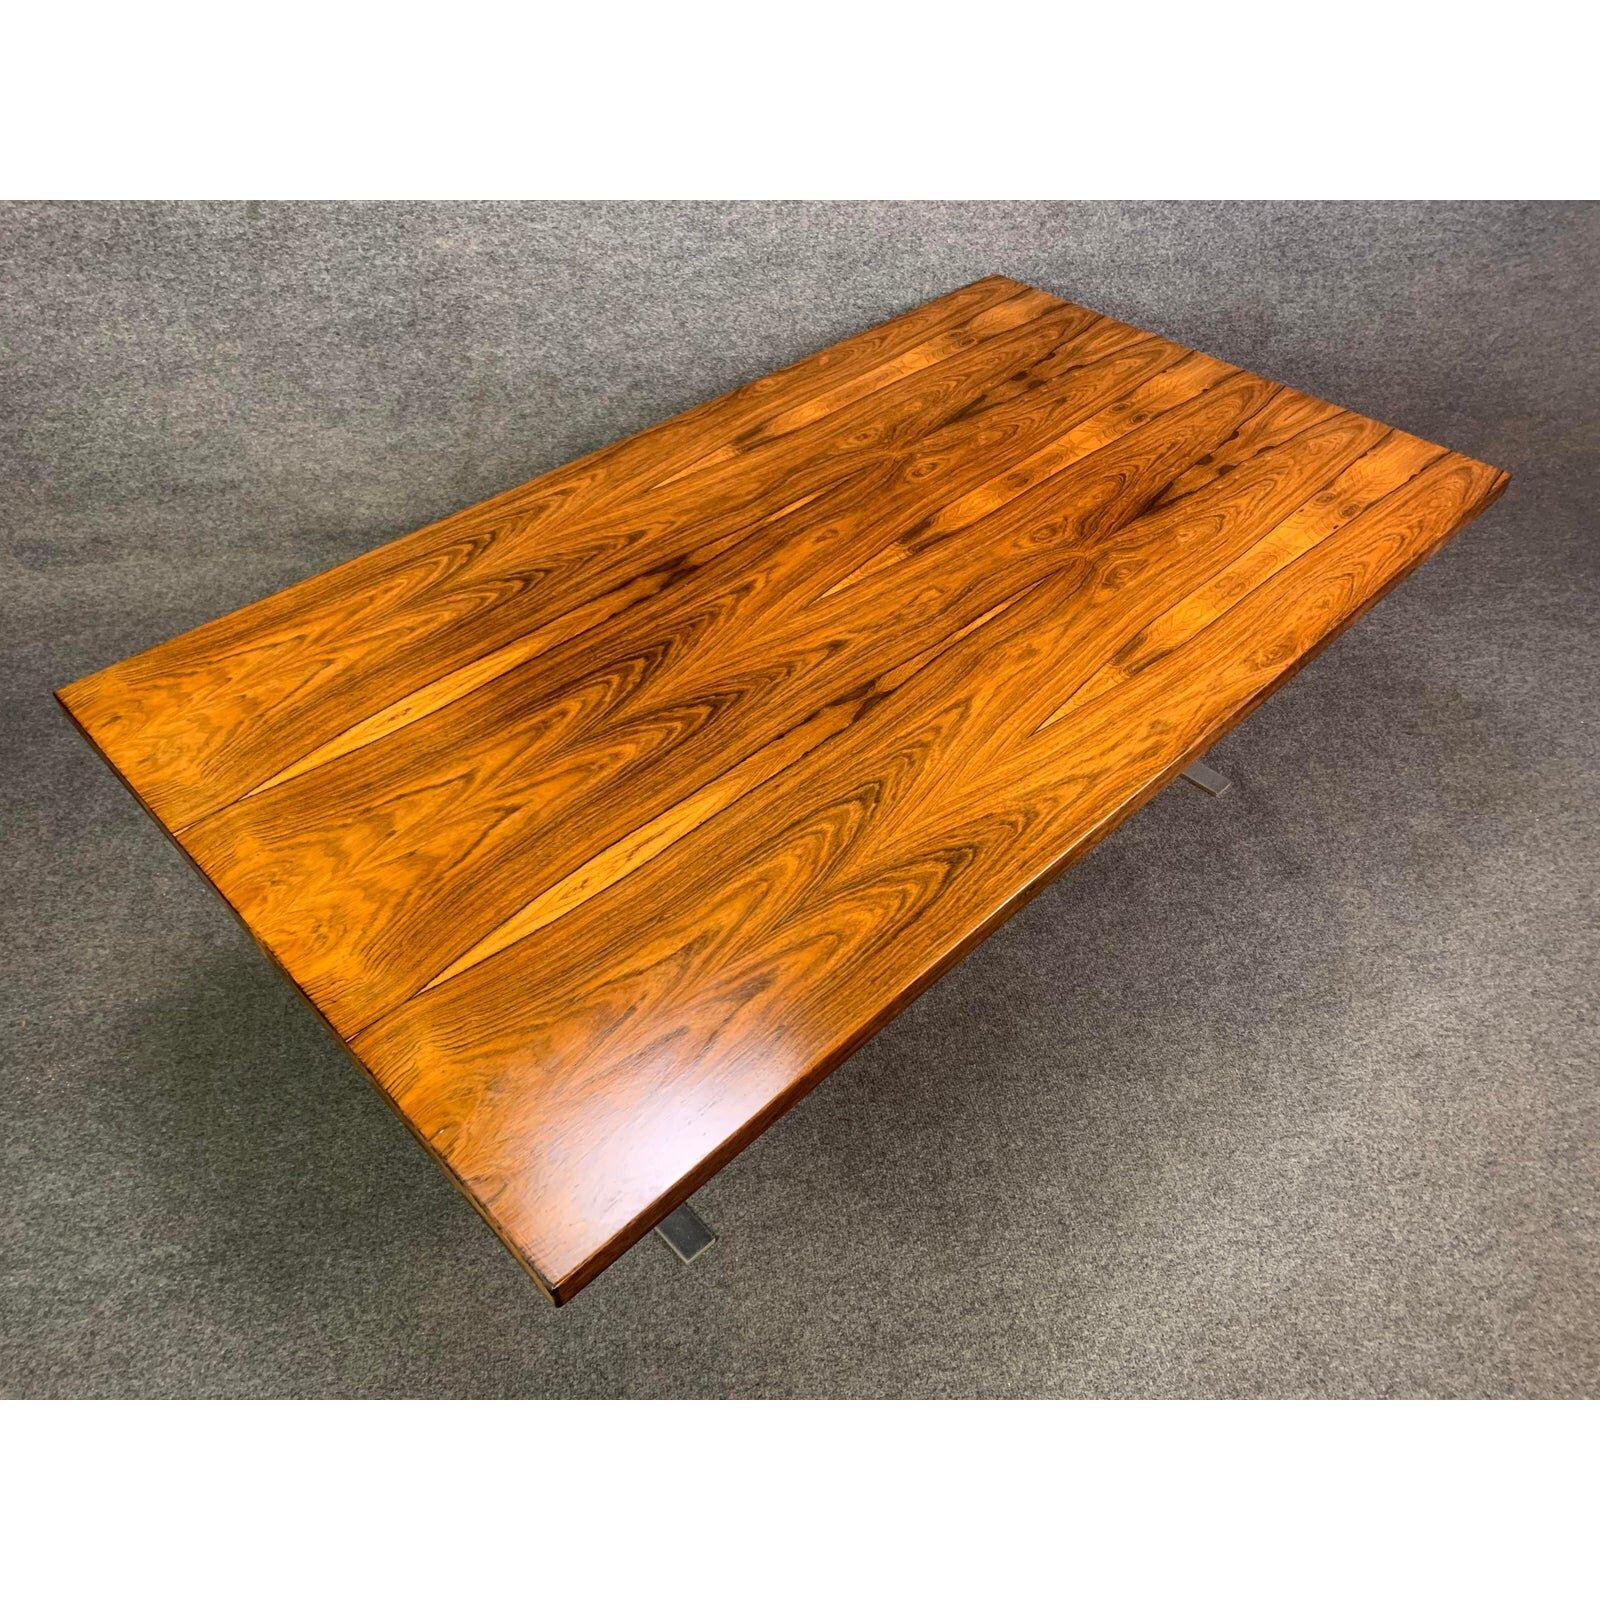 Vintage Danish Mid-Century Modern Rosewood and Chrome Large Coffee Table For Sale 4